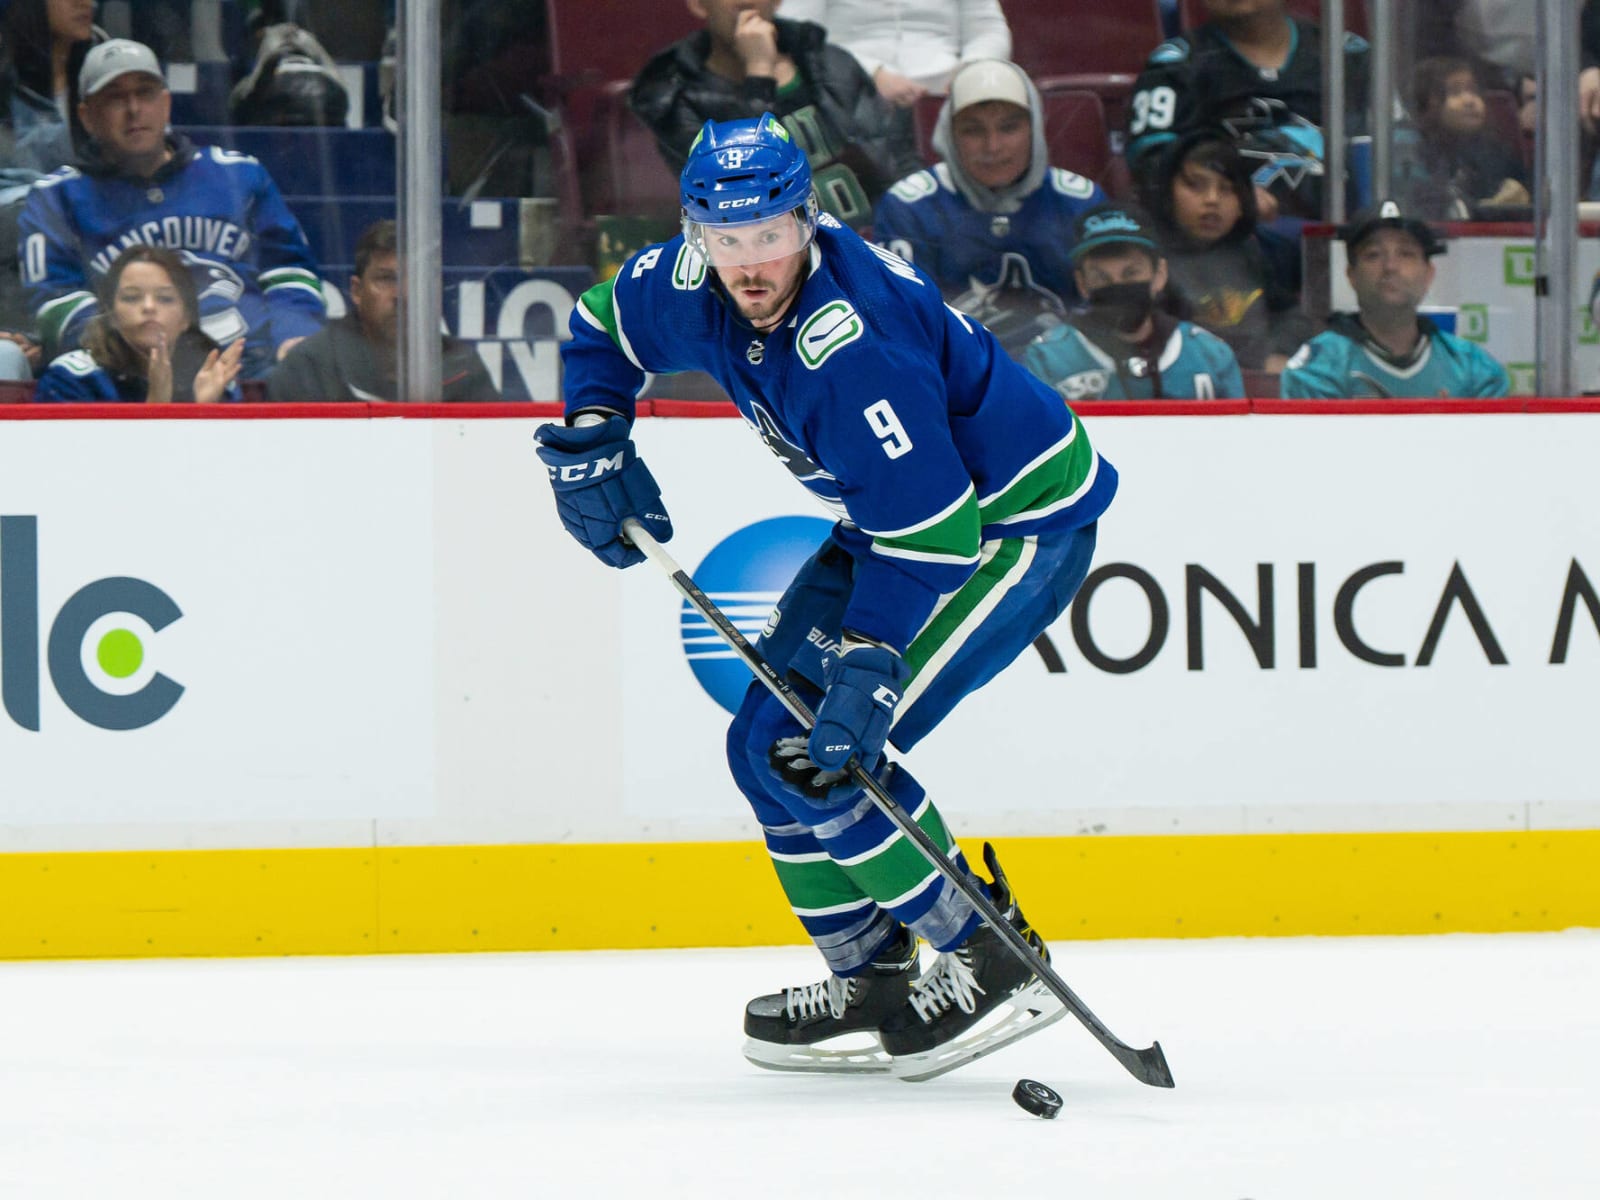 J.T. Miller takes 'great pride' in new long-term deal with Canucks